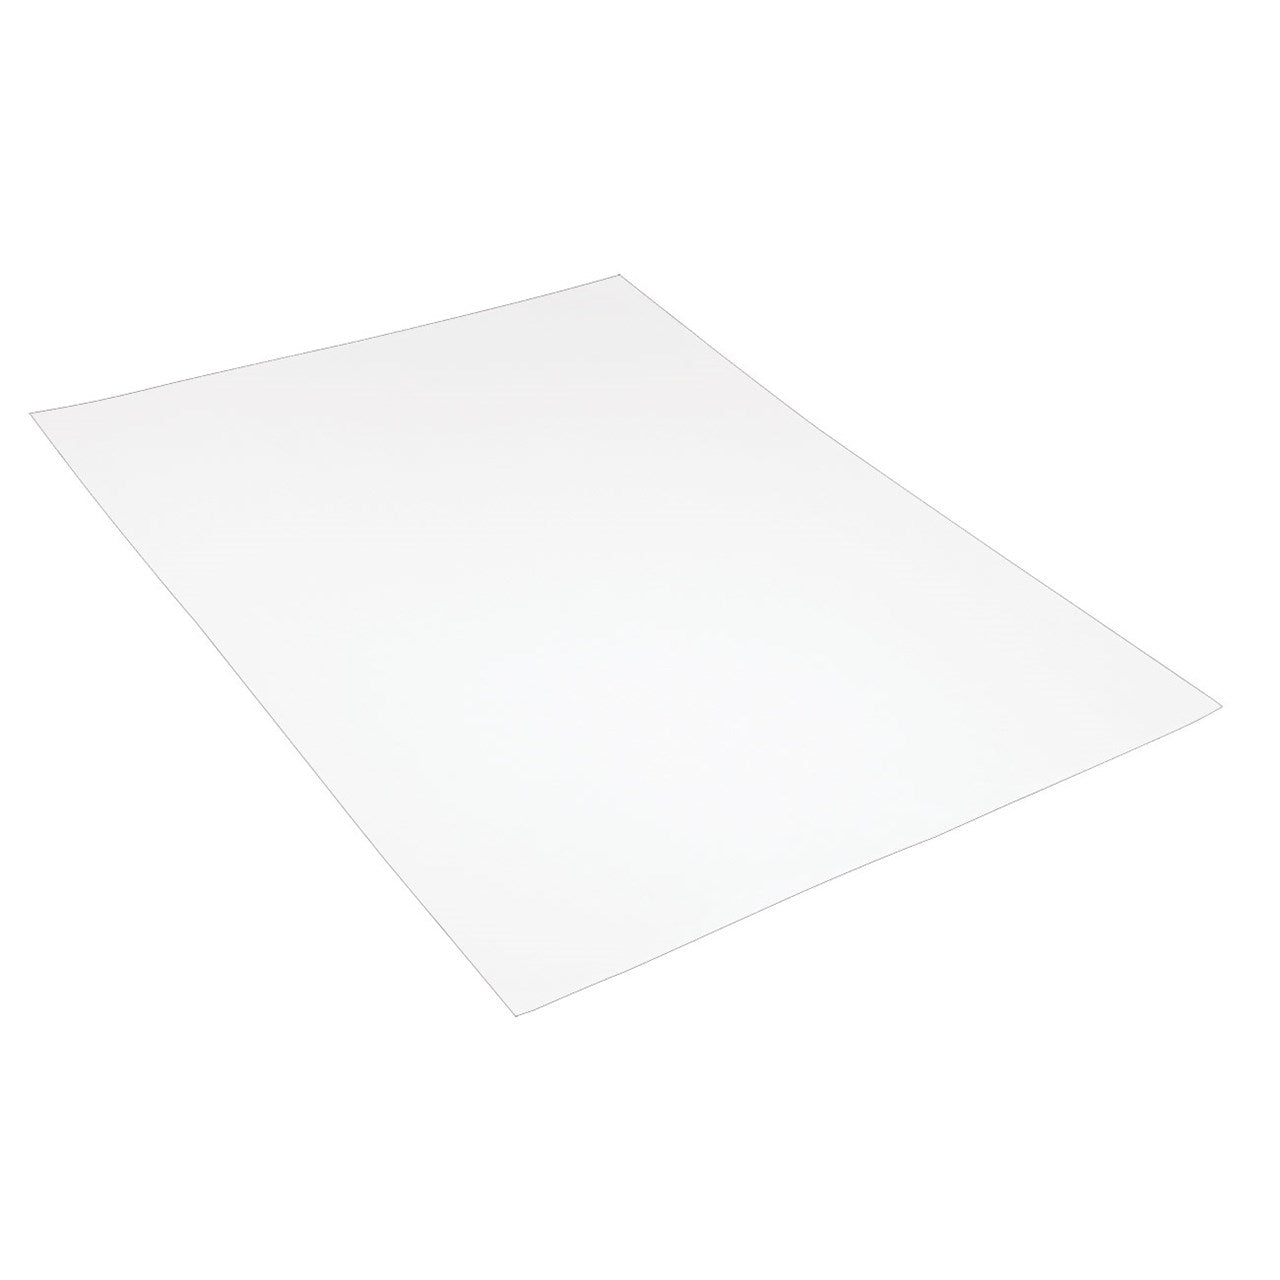 Heavy Braille Paper - 100 Sheets